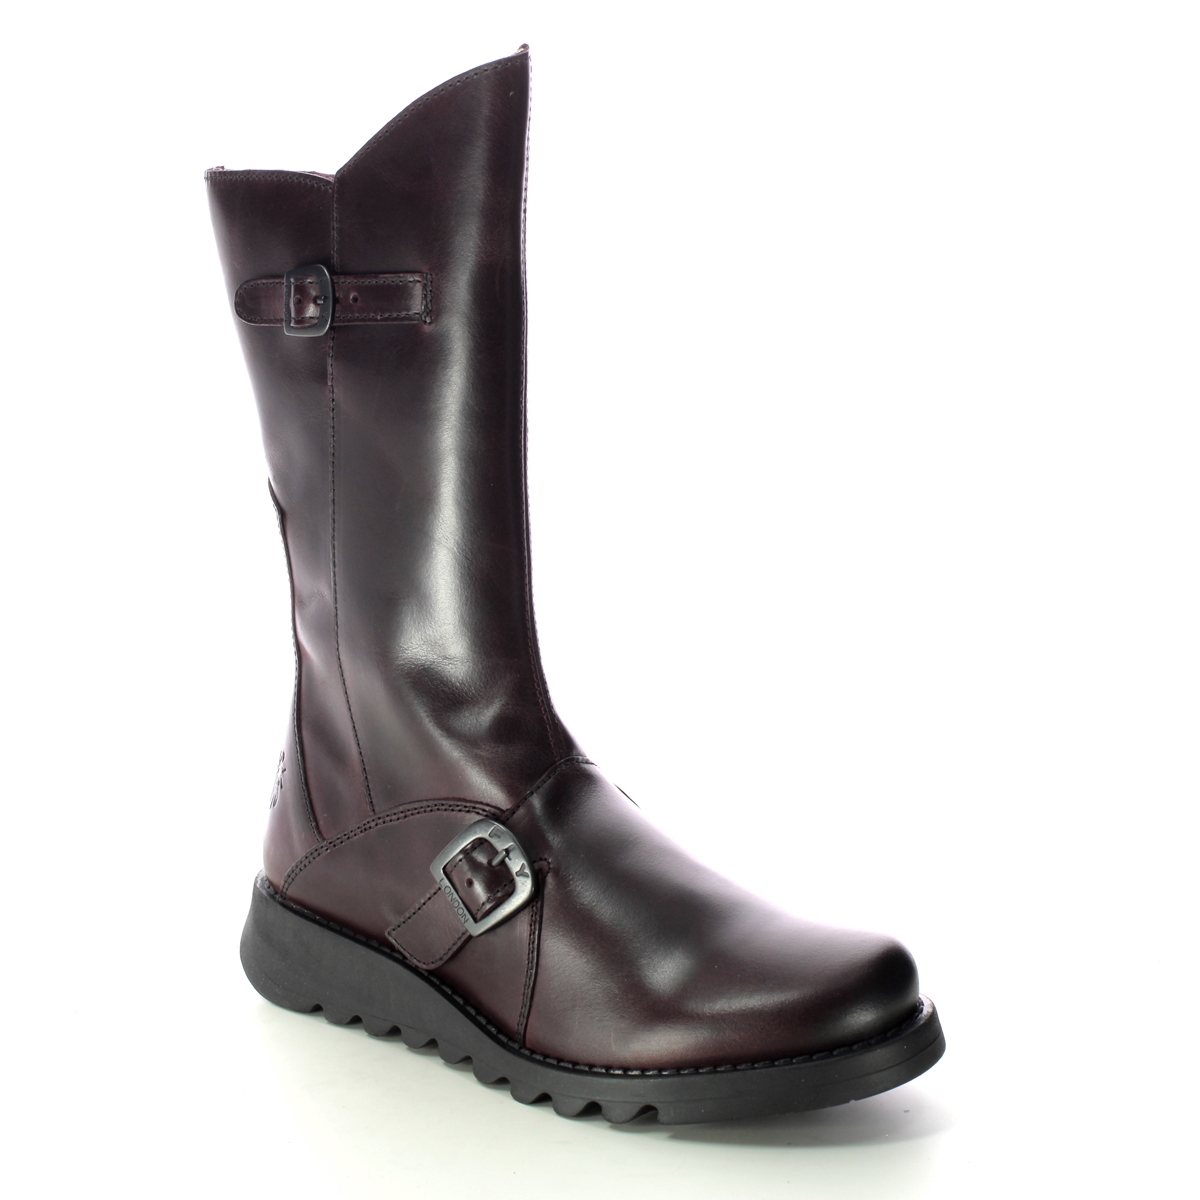 Fly London Mes 2 Wine Leather Womens Mid Calf Boots P142913 In Size 37 In Plain Wine Leather